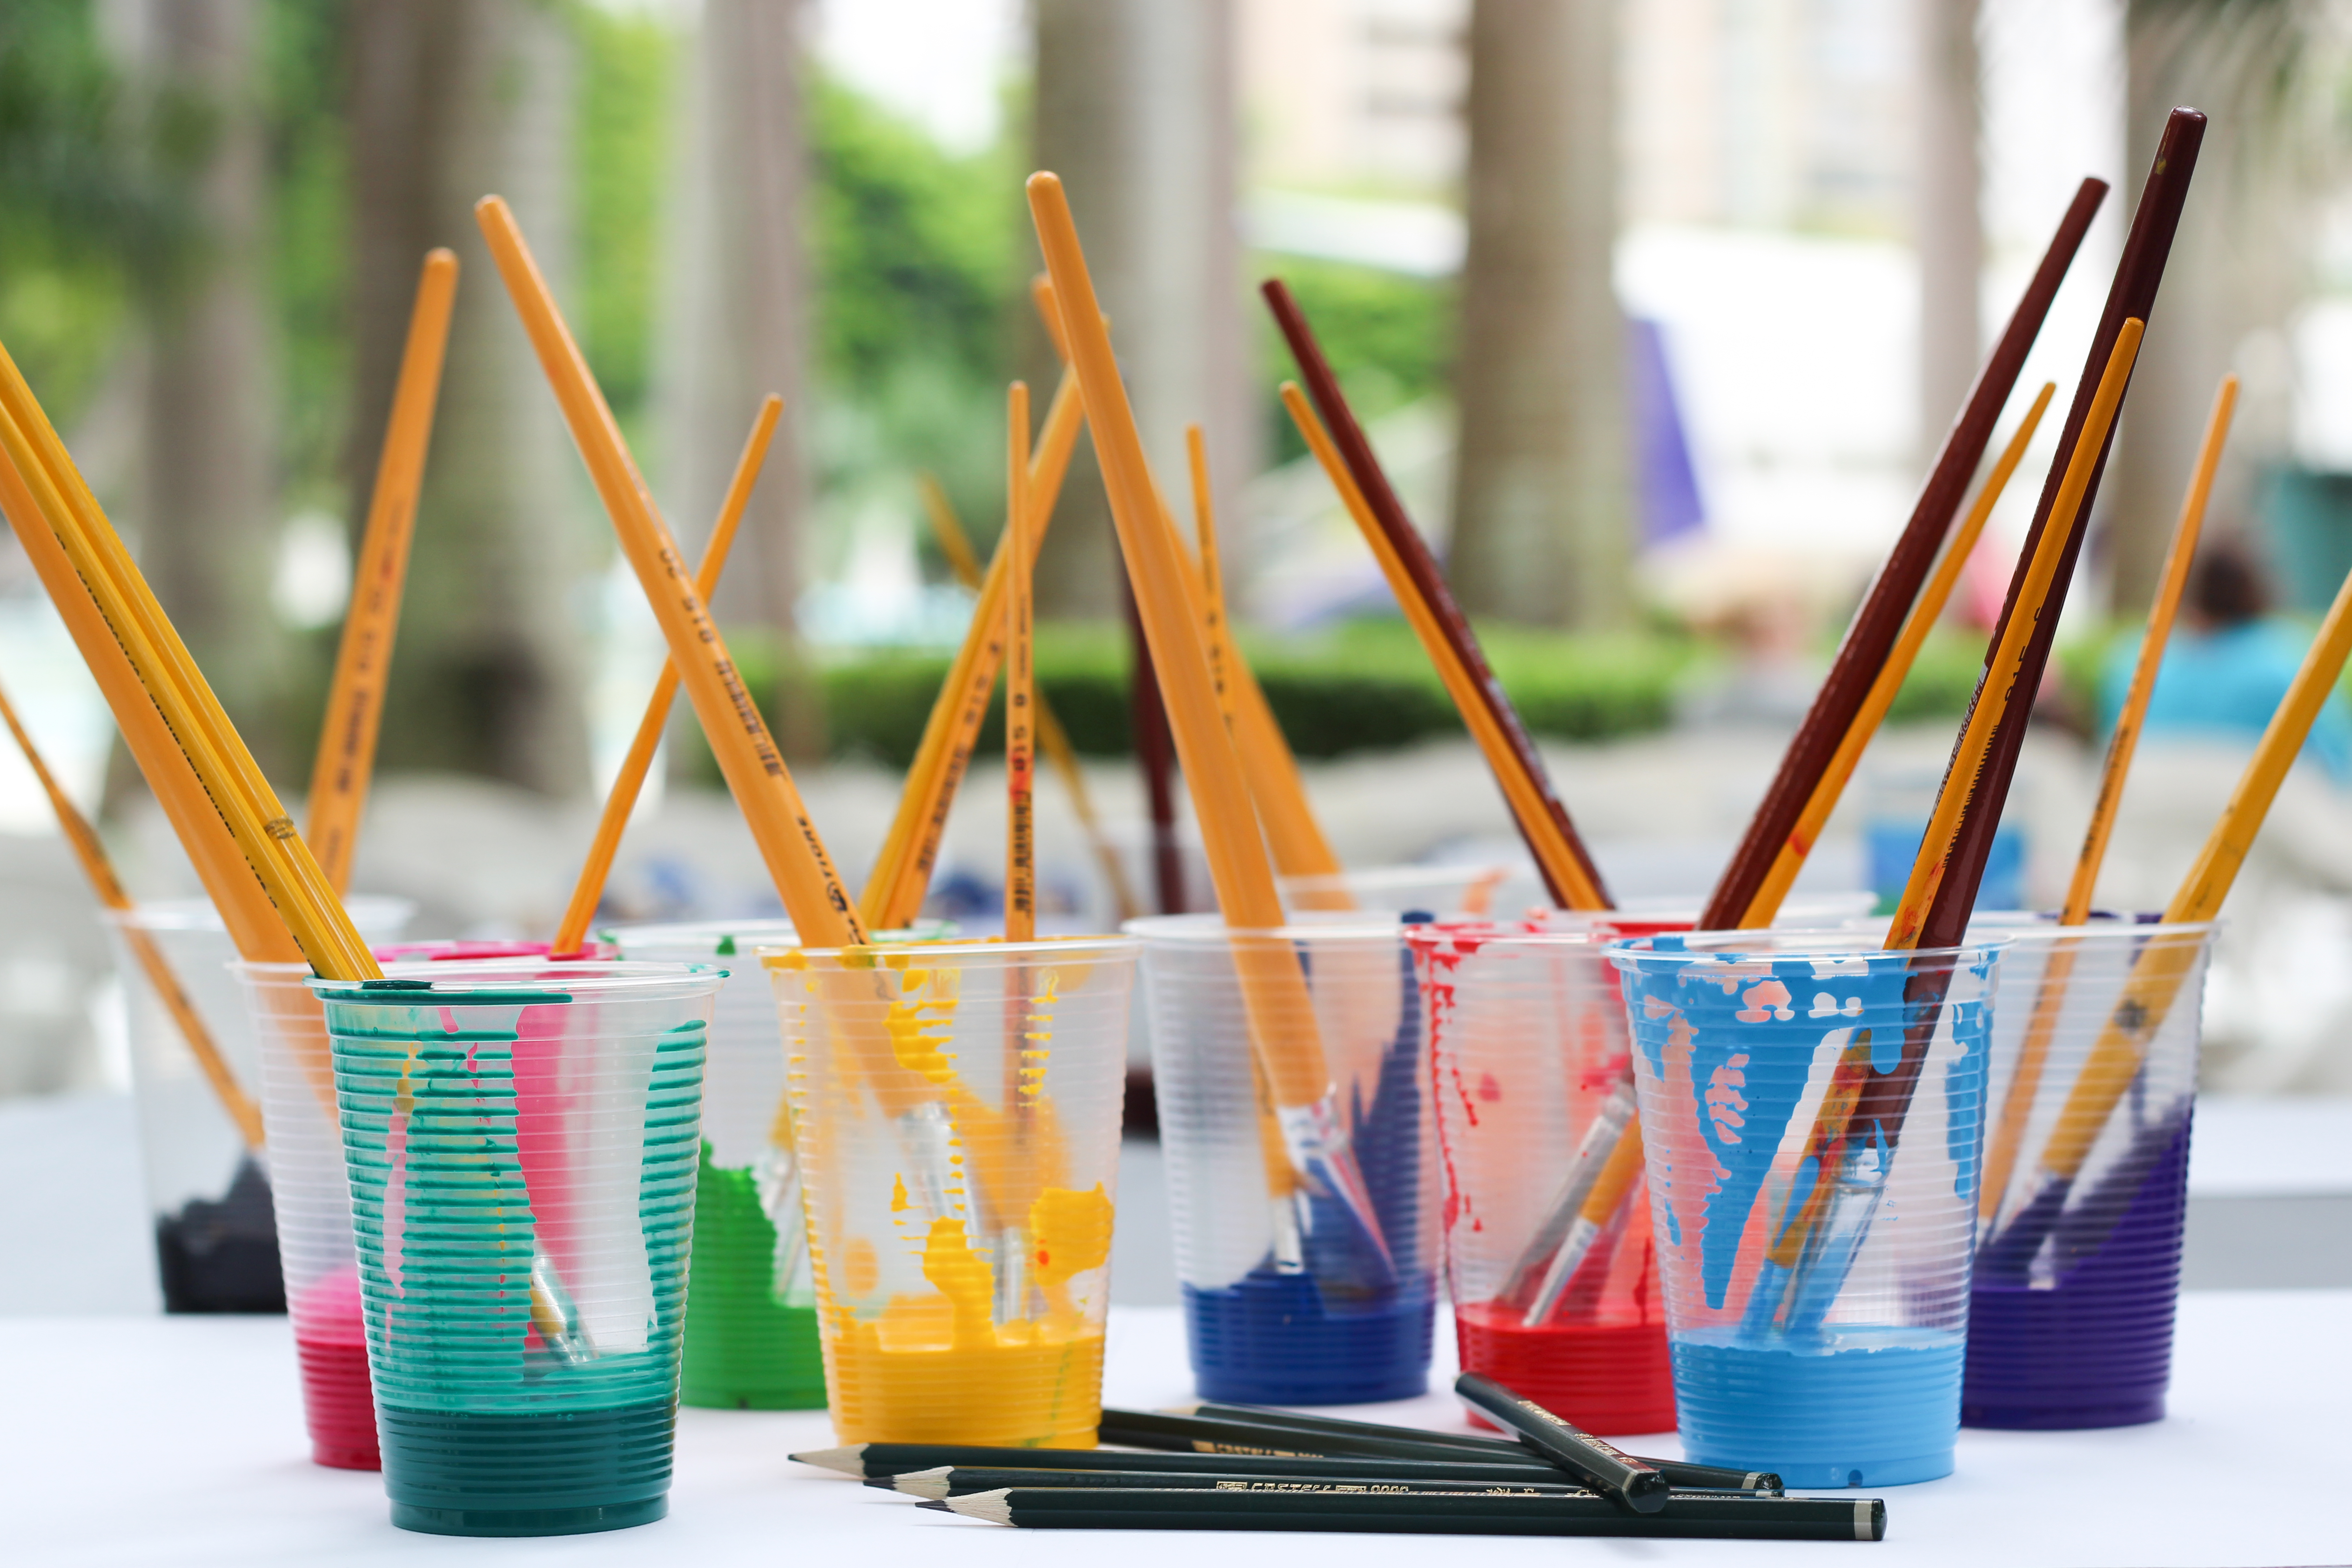 Paint brushes in cups of multi-colored paint.